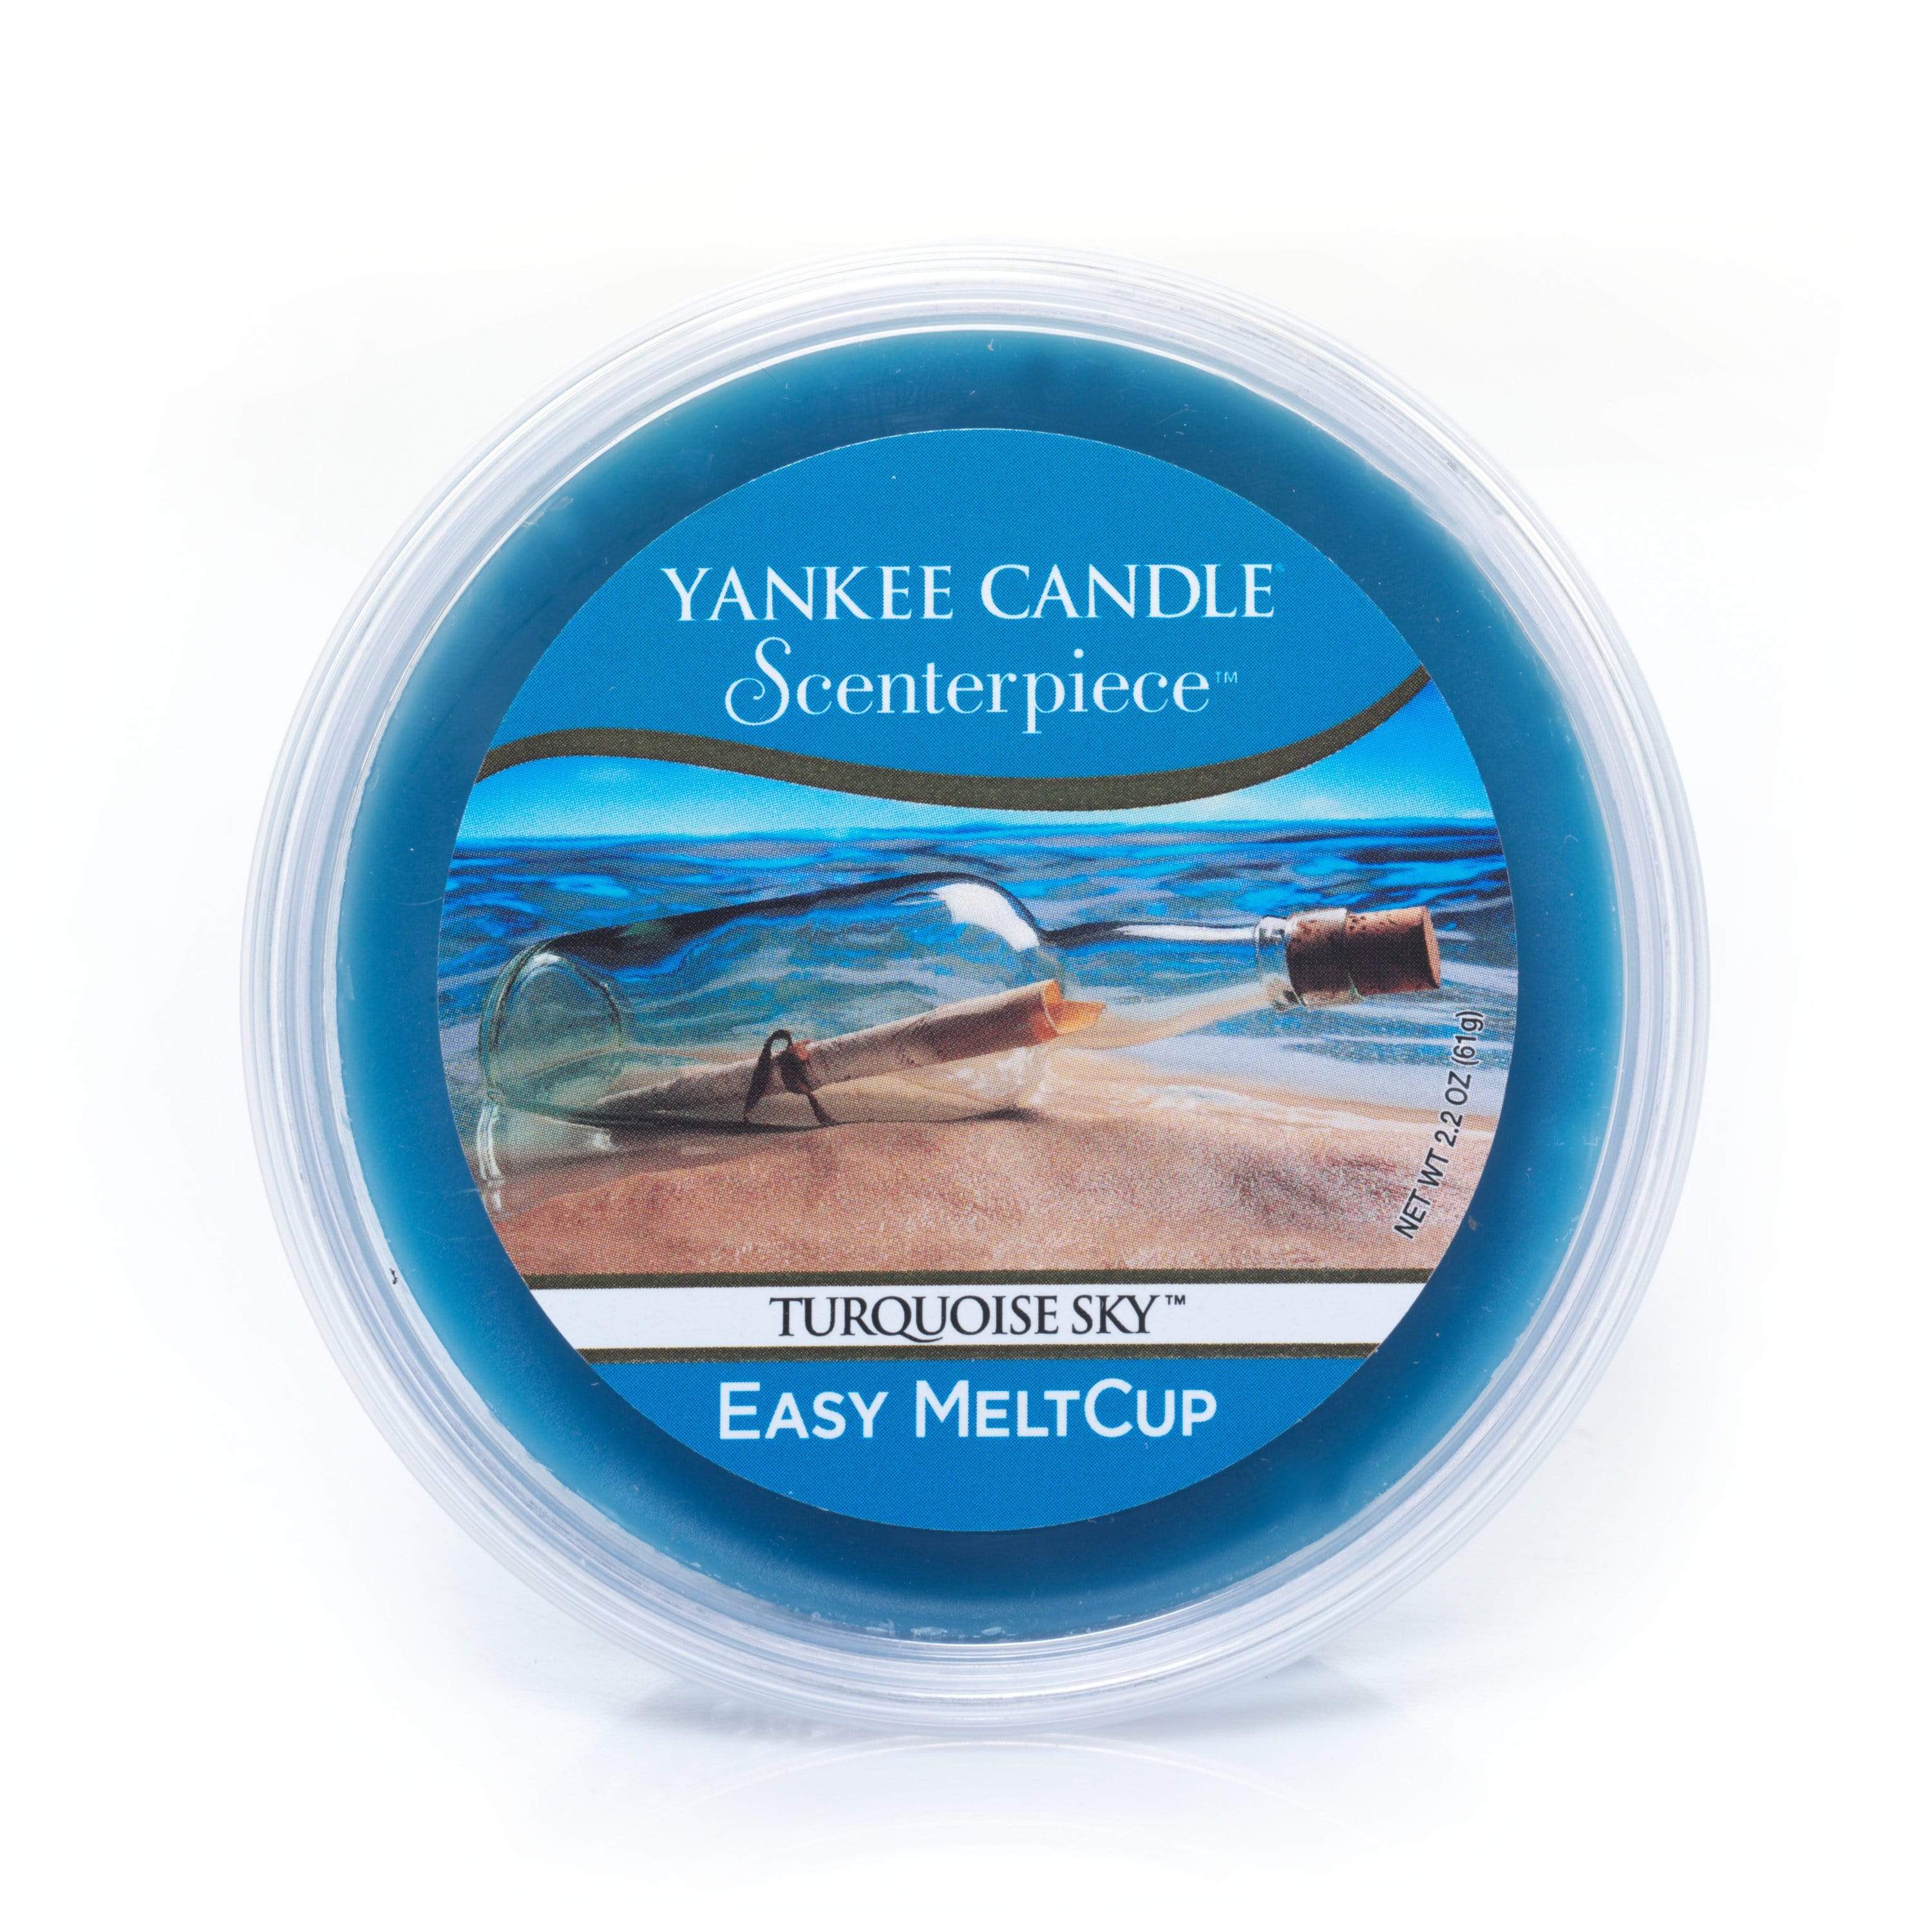 Yankee Candle Melt Cup Yankee Candle Scenterpiece Melt Cup - Turquoise Sky